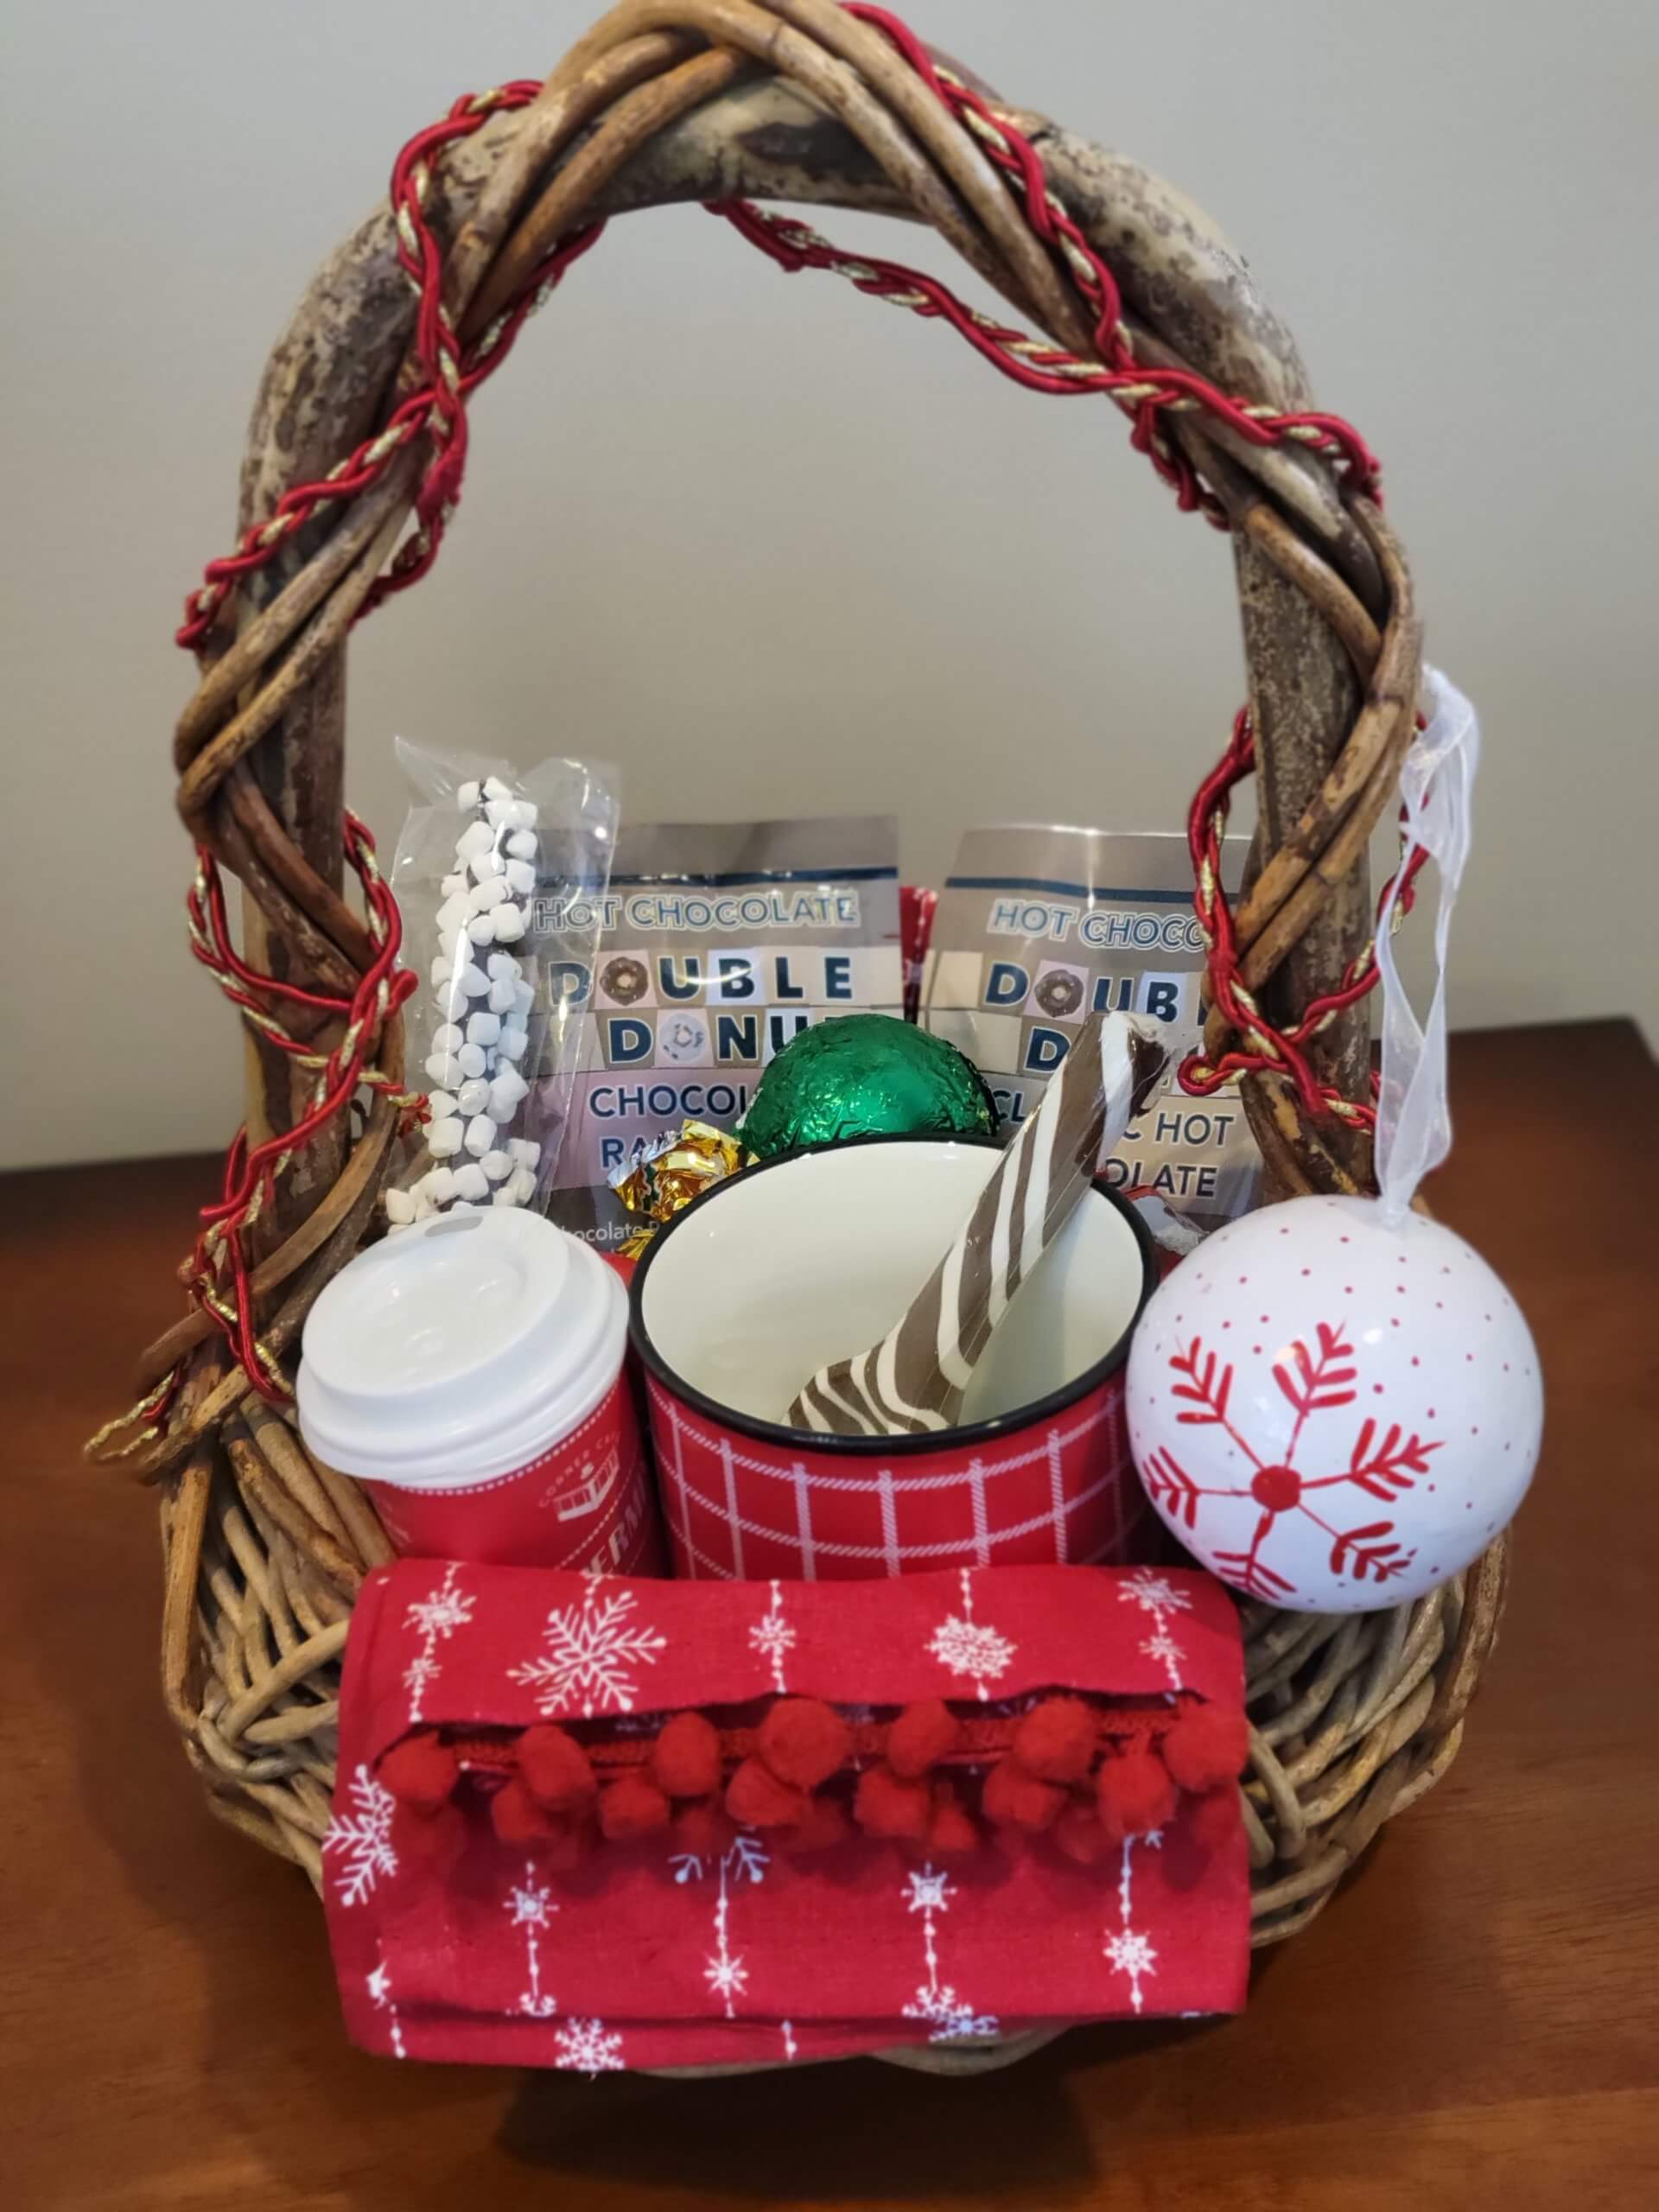 A basket with Gus, the Goodco Elf